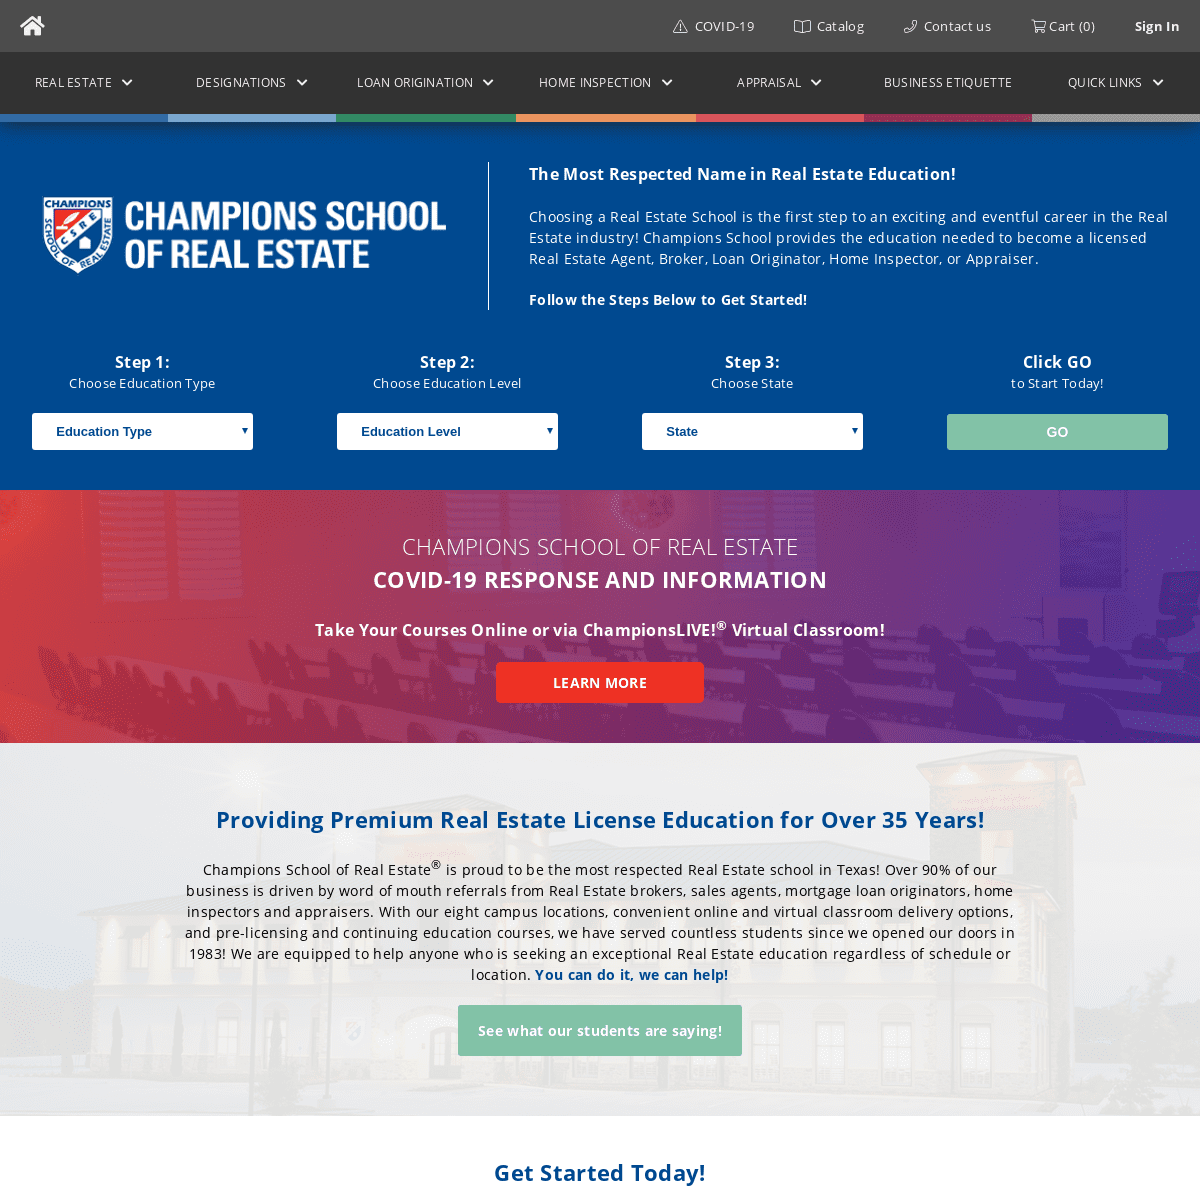 A complete backup of championsschool.com